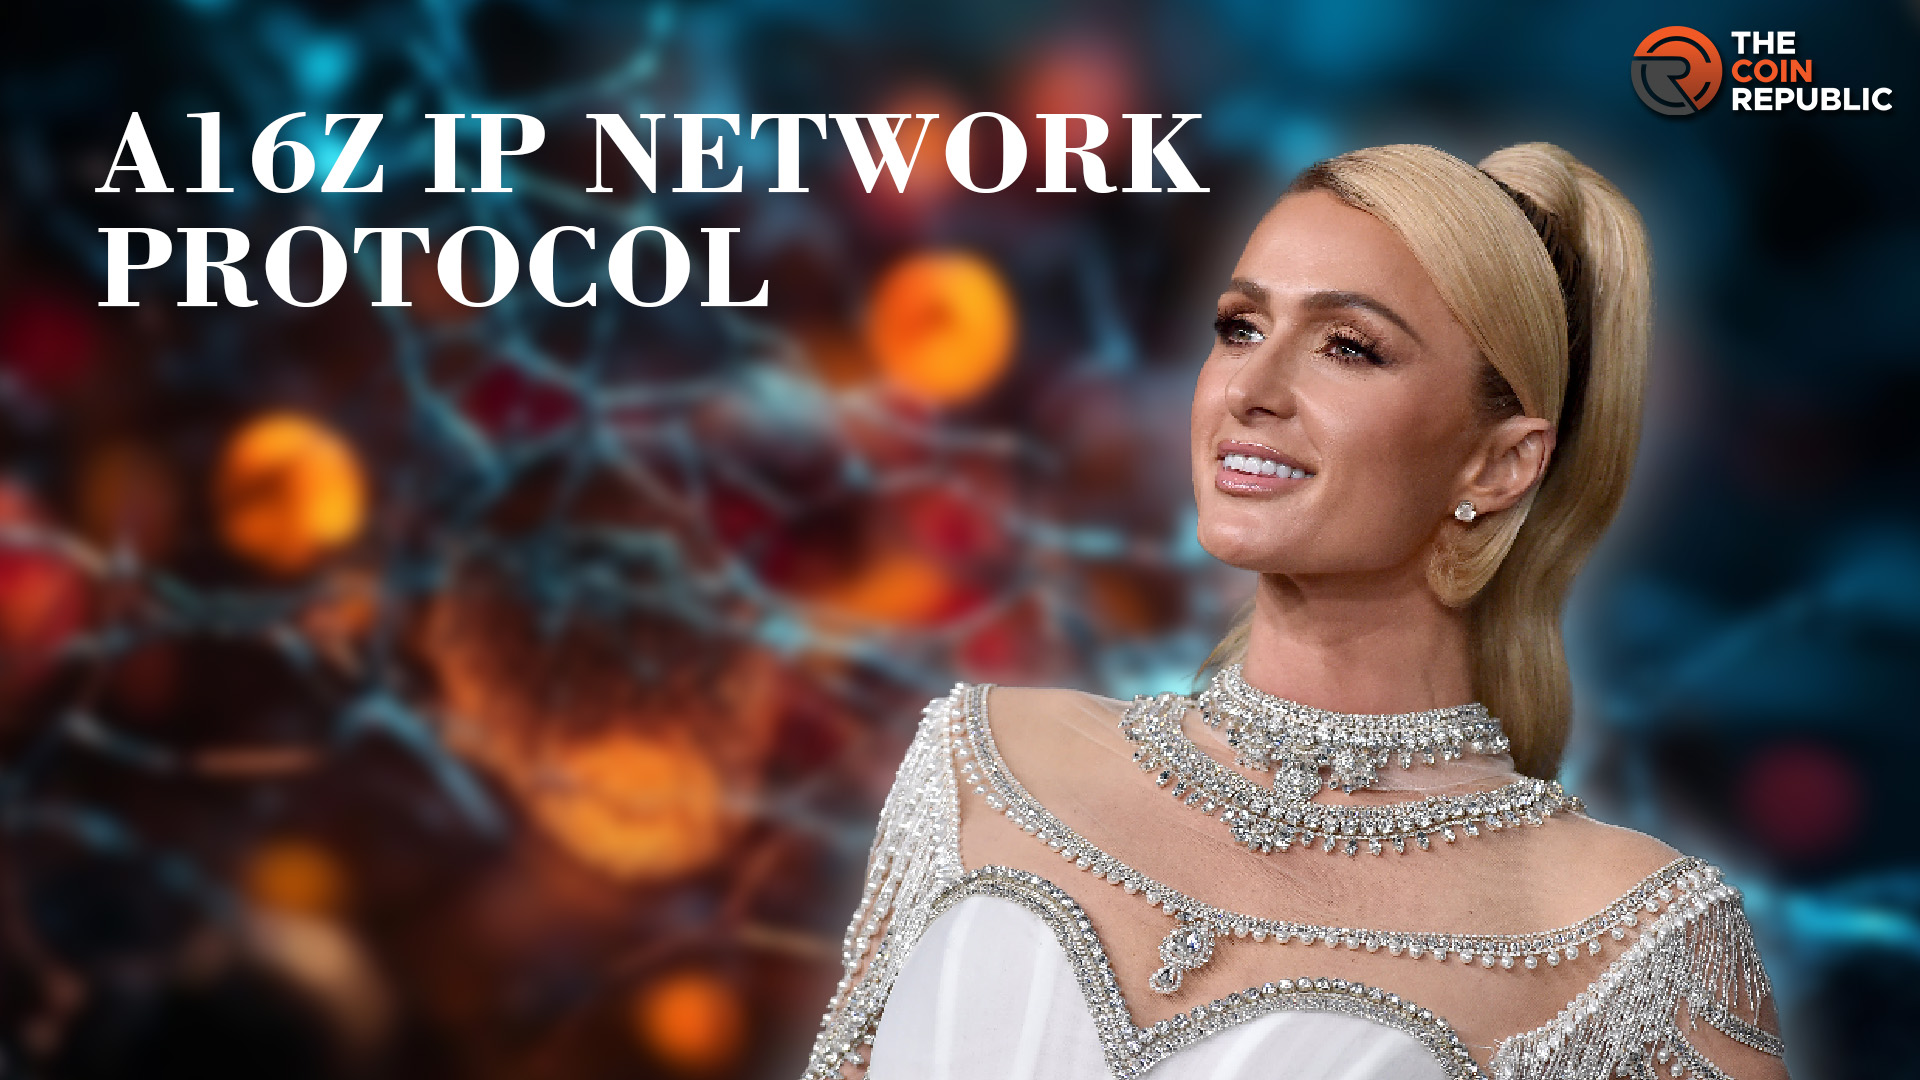 Paris Hilton Supports IP Ownership Protocol Story Among Others